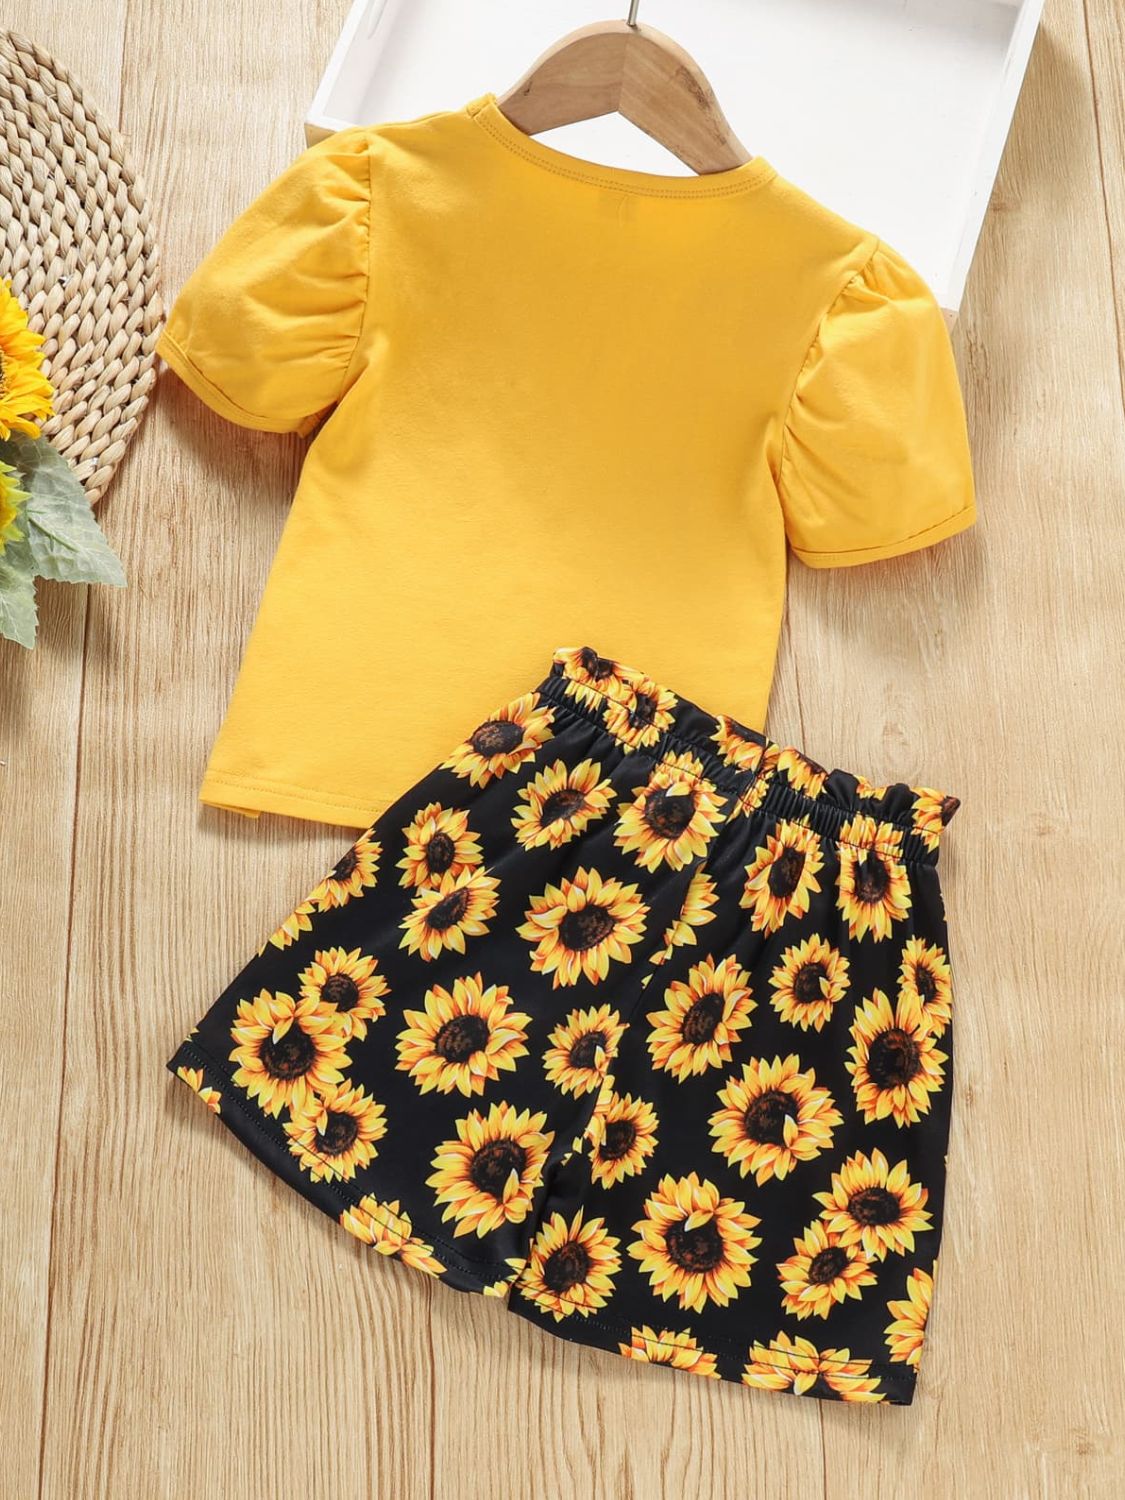 - Girls Slogan Graphic Top and Sunflower Print Shorts Set - toddler tee & short set at TFC&H Co.